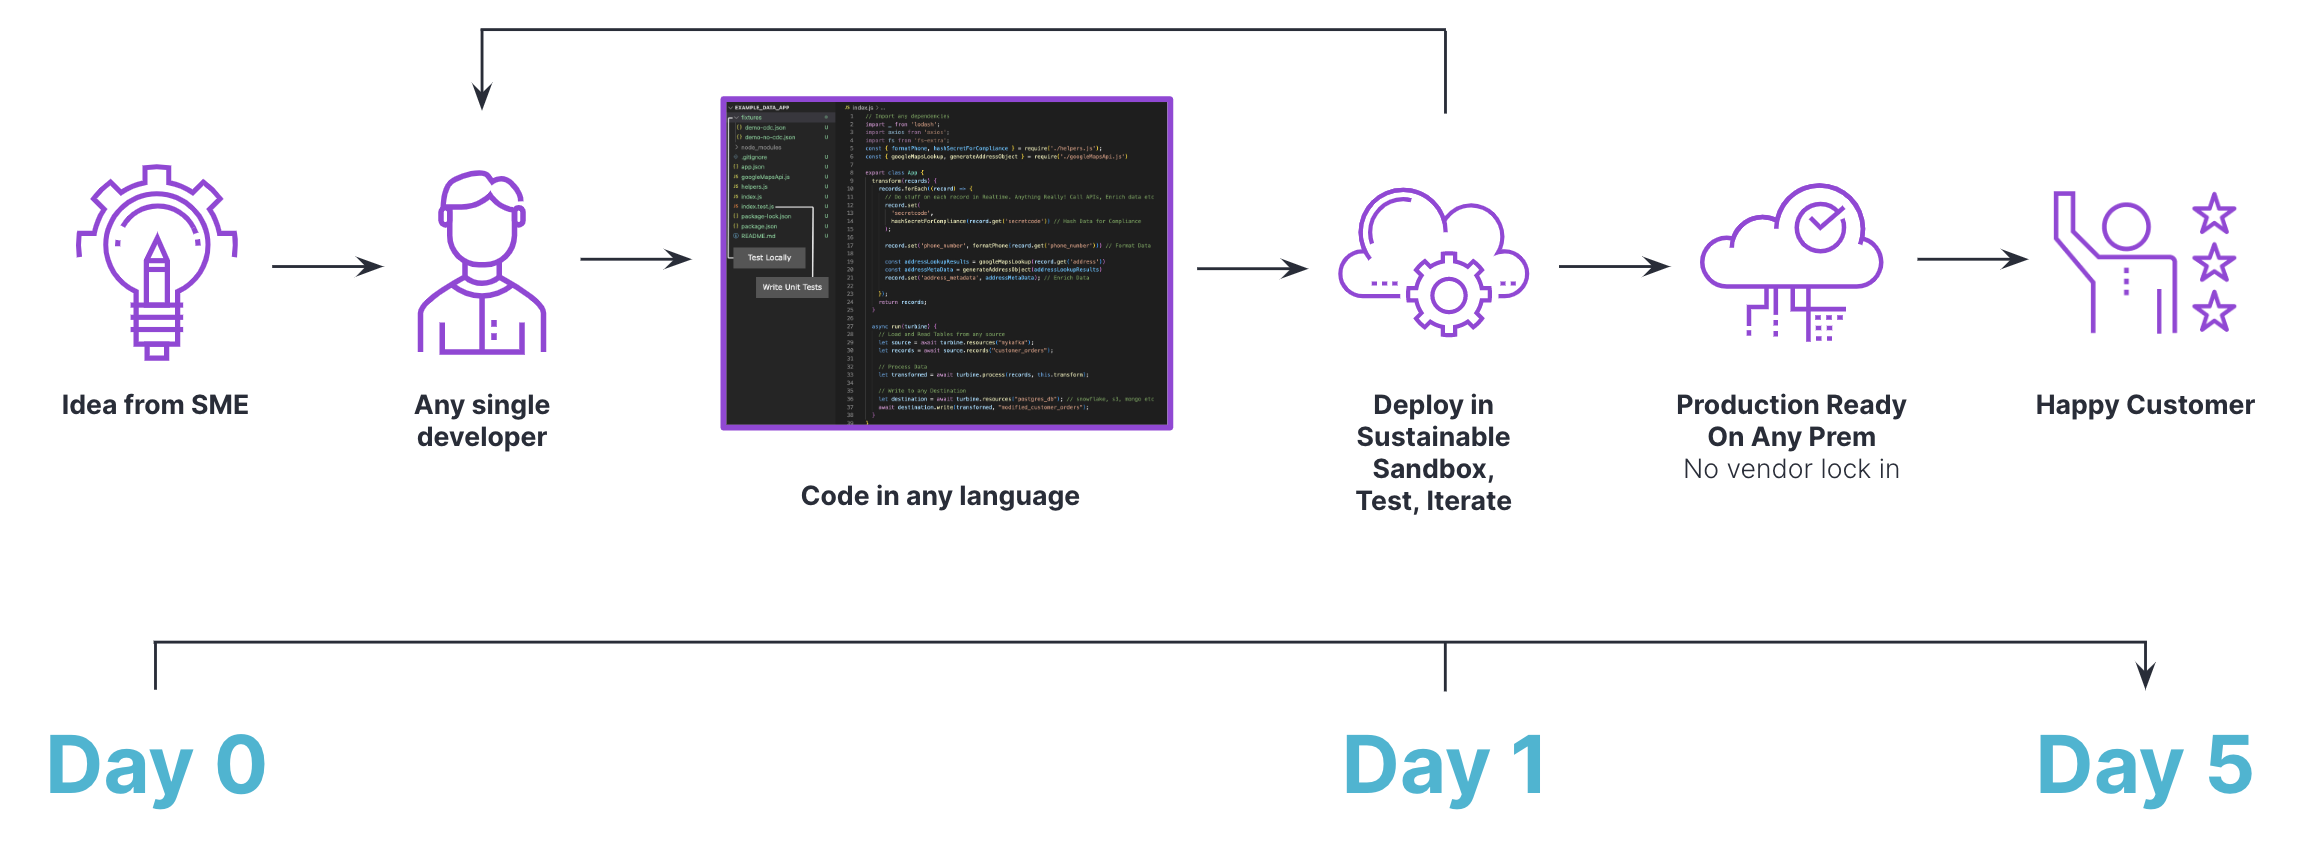 Diagram illustrating how easy Meroxa makes it to build, test, iterate, and deploy.